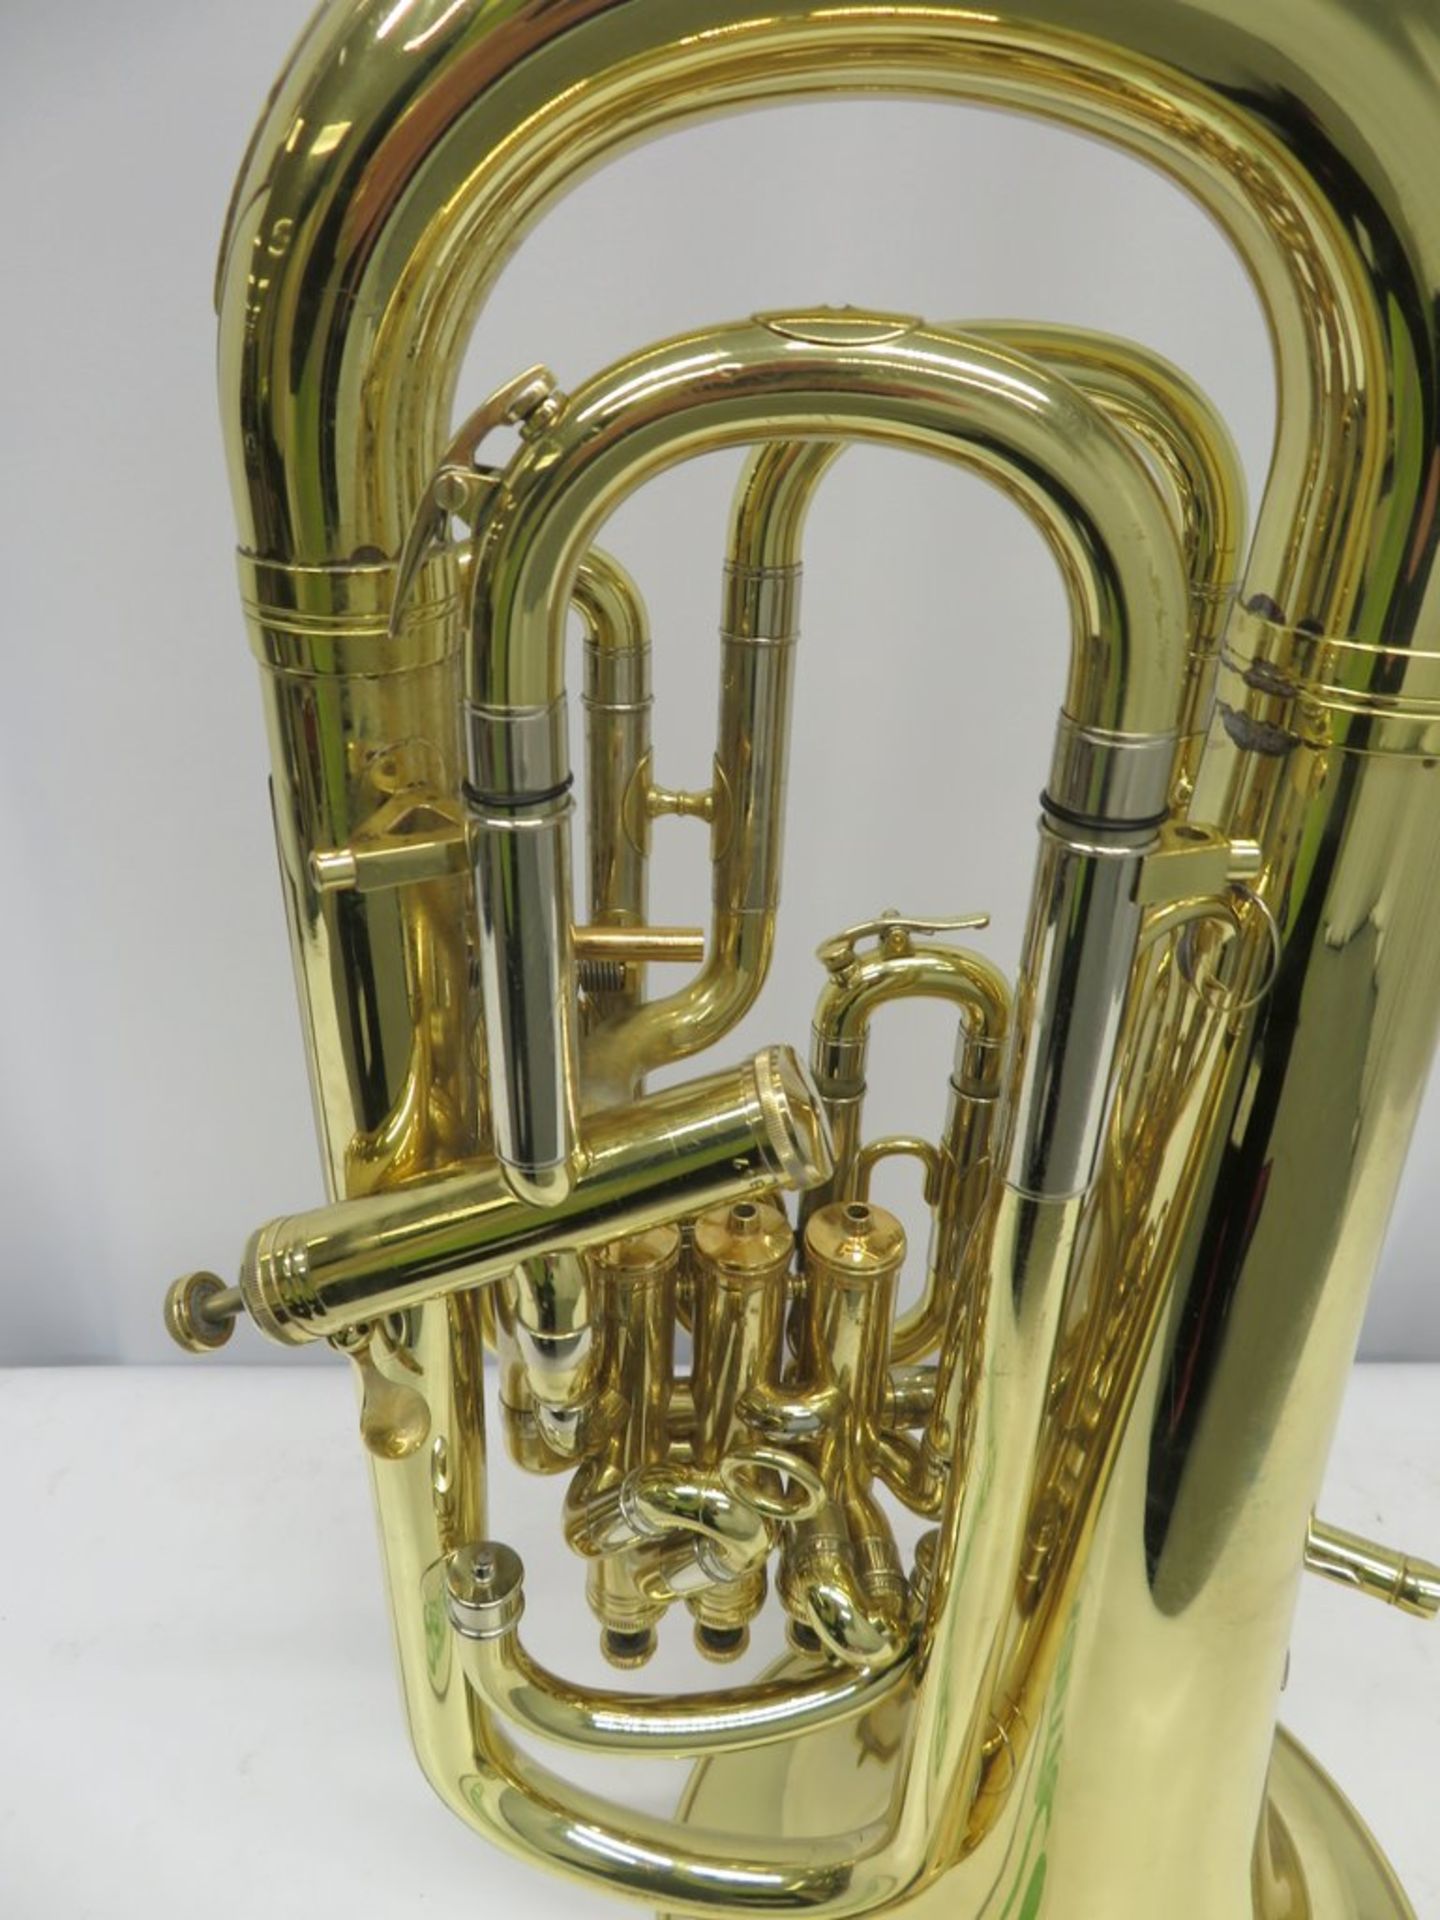 Besson Prestige BE2052 Euphonium With Case. Serial Number: 08300275. Please Note This Ite - Image 10 of 16